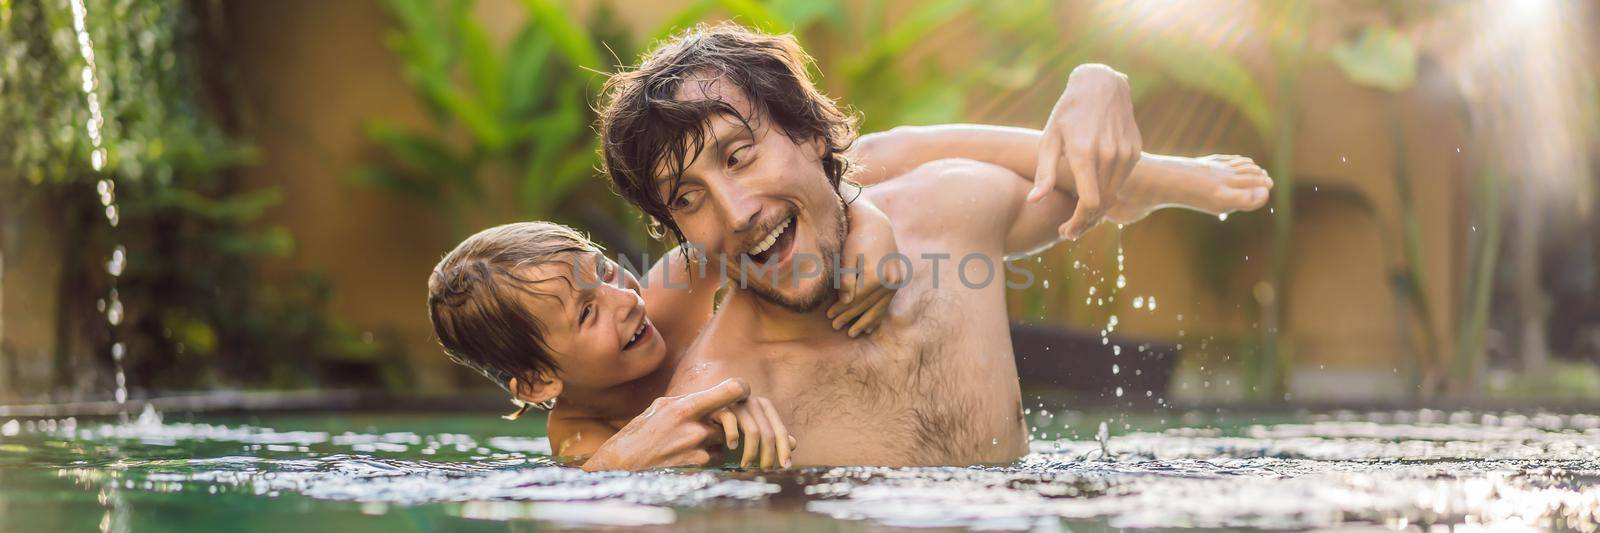 Dad and son have fun in the pool BANNER, LONG FORMAT by galitskaya